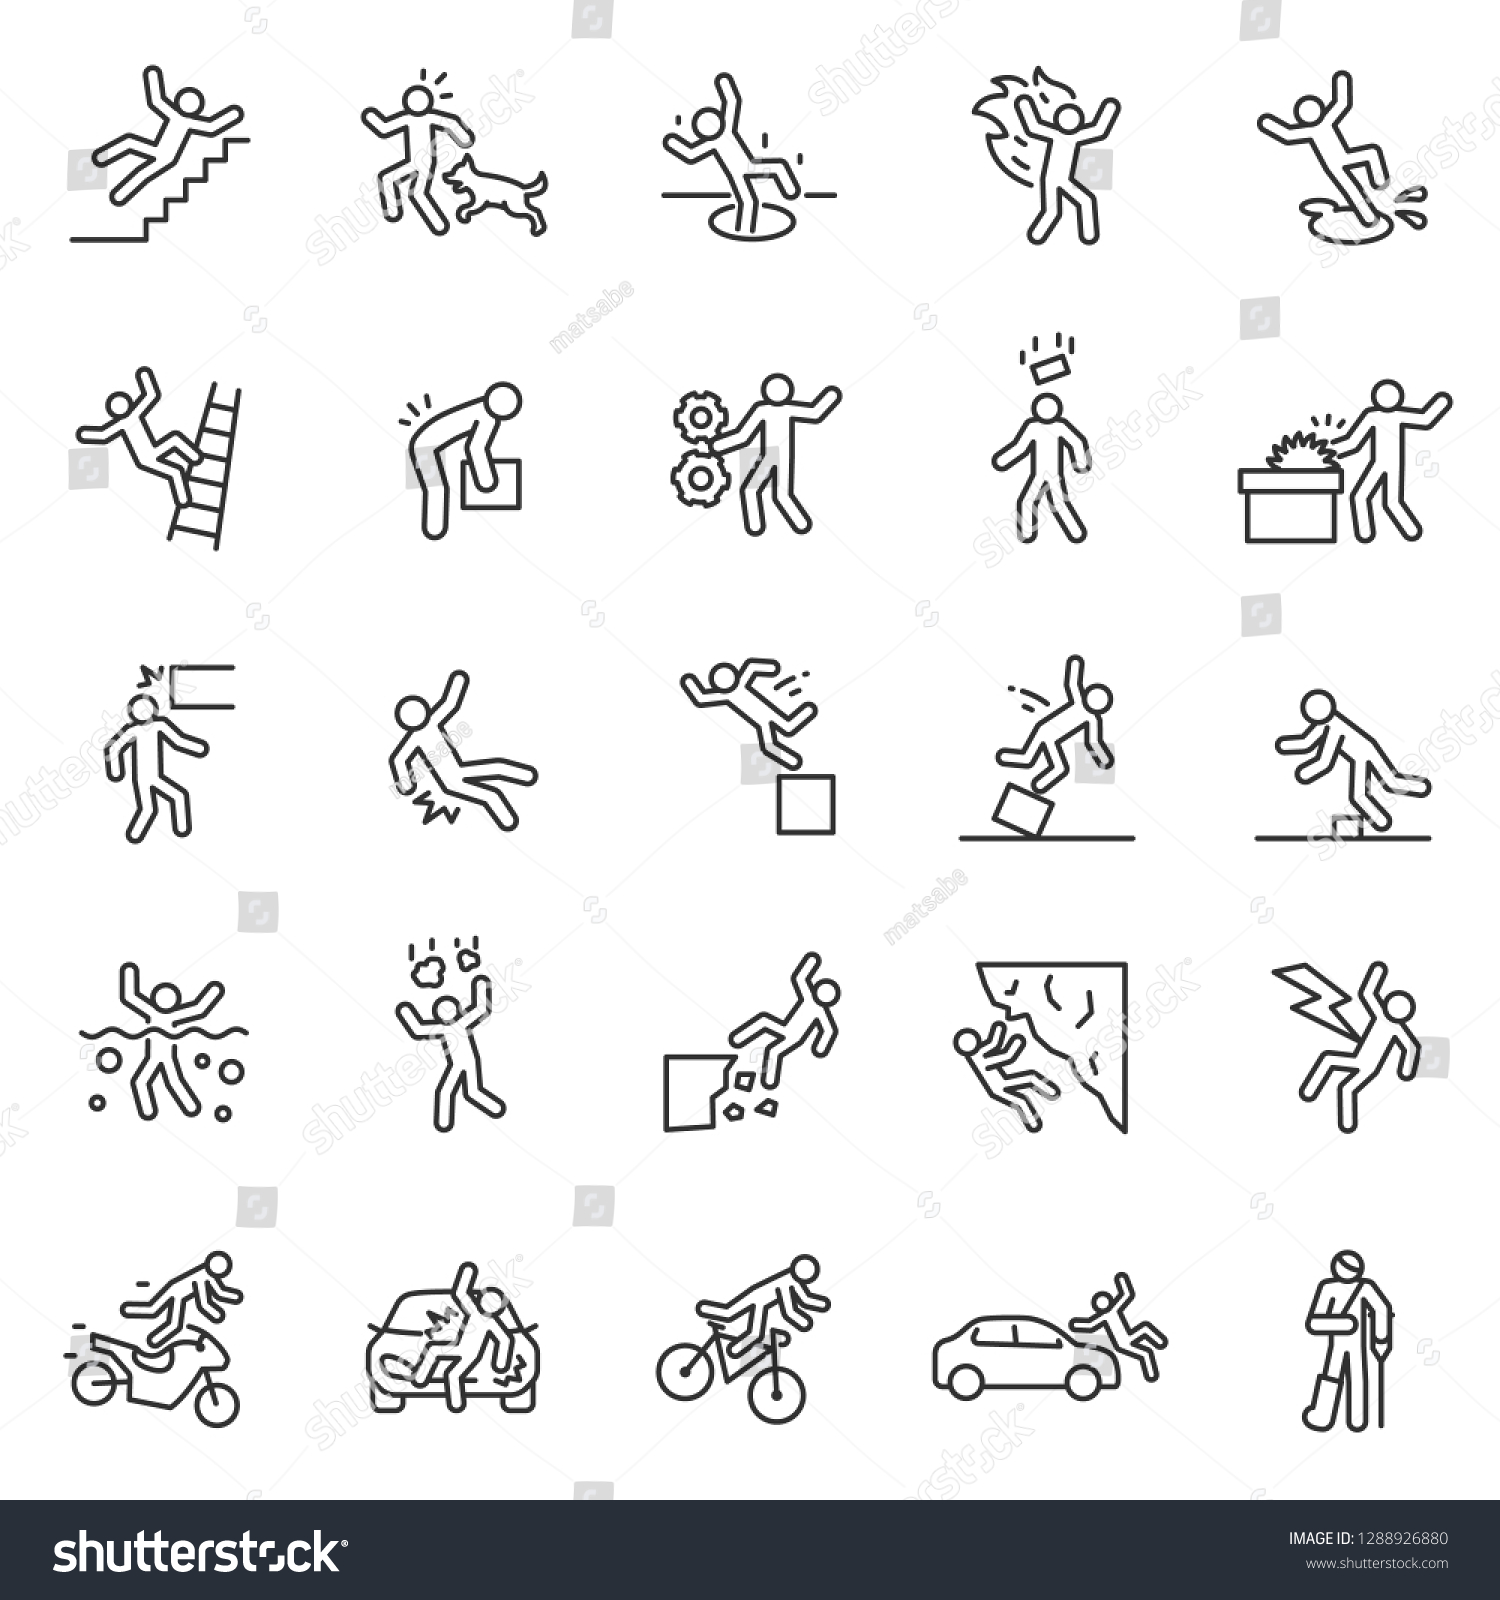 Accident, icon set. Falls, blows, car accidents, work injury, etc. People pictogram. linear icons. Line with editable stroke #1288926880